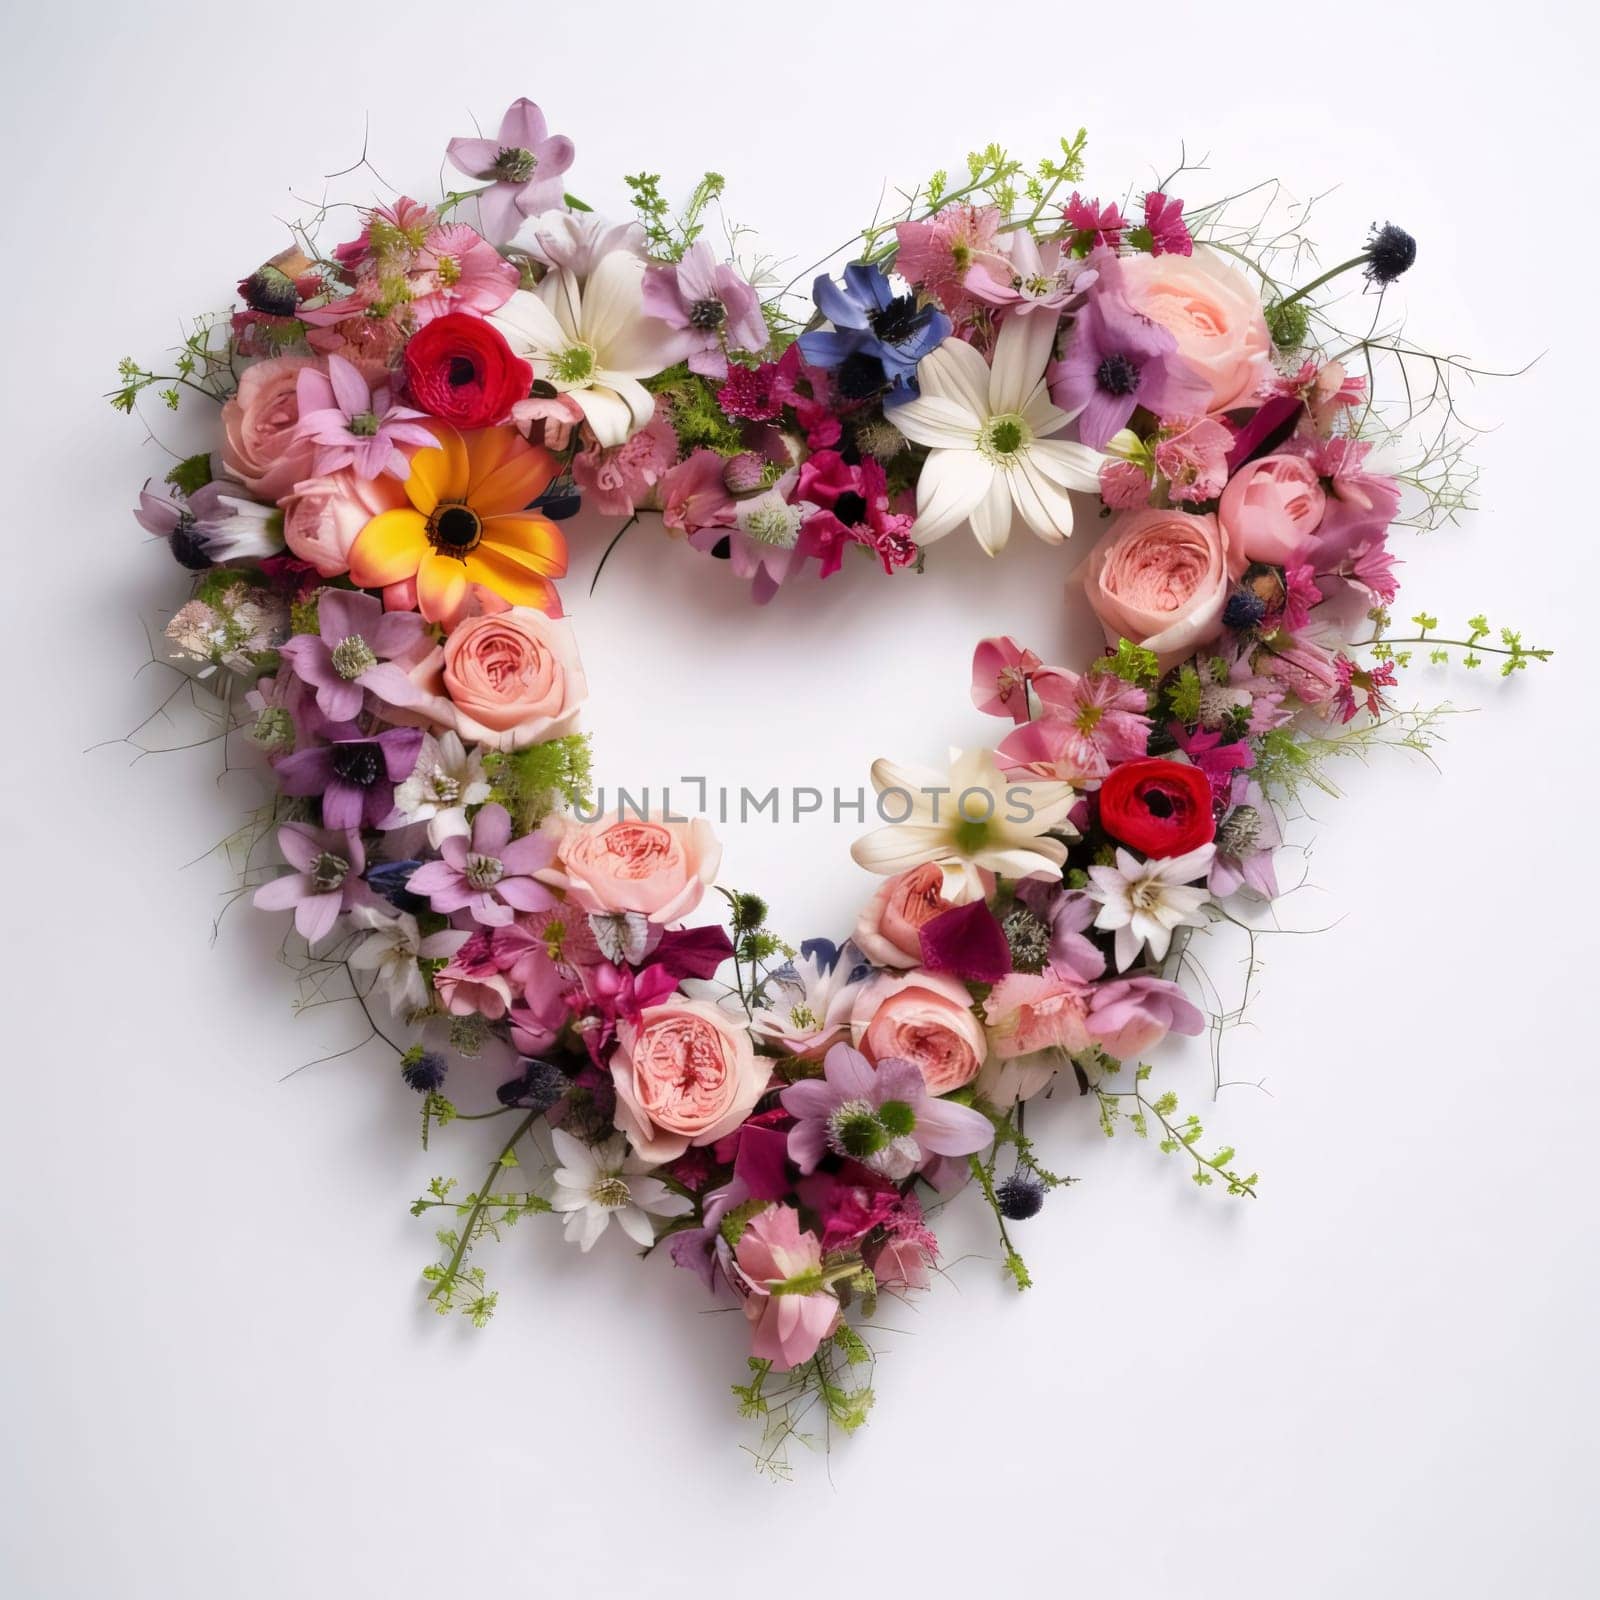 A heart formed of colorful flowers on a bright white background. Flowering flowers, a symbol of spring, new life. by ThemesS